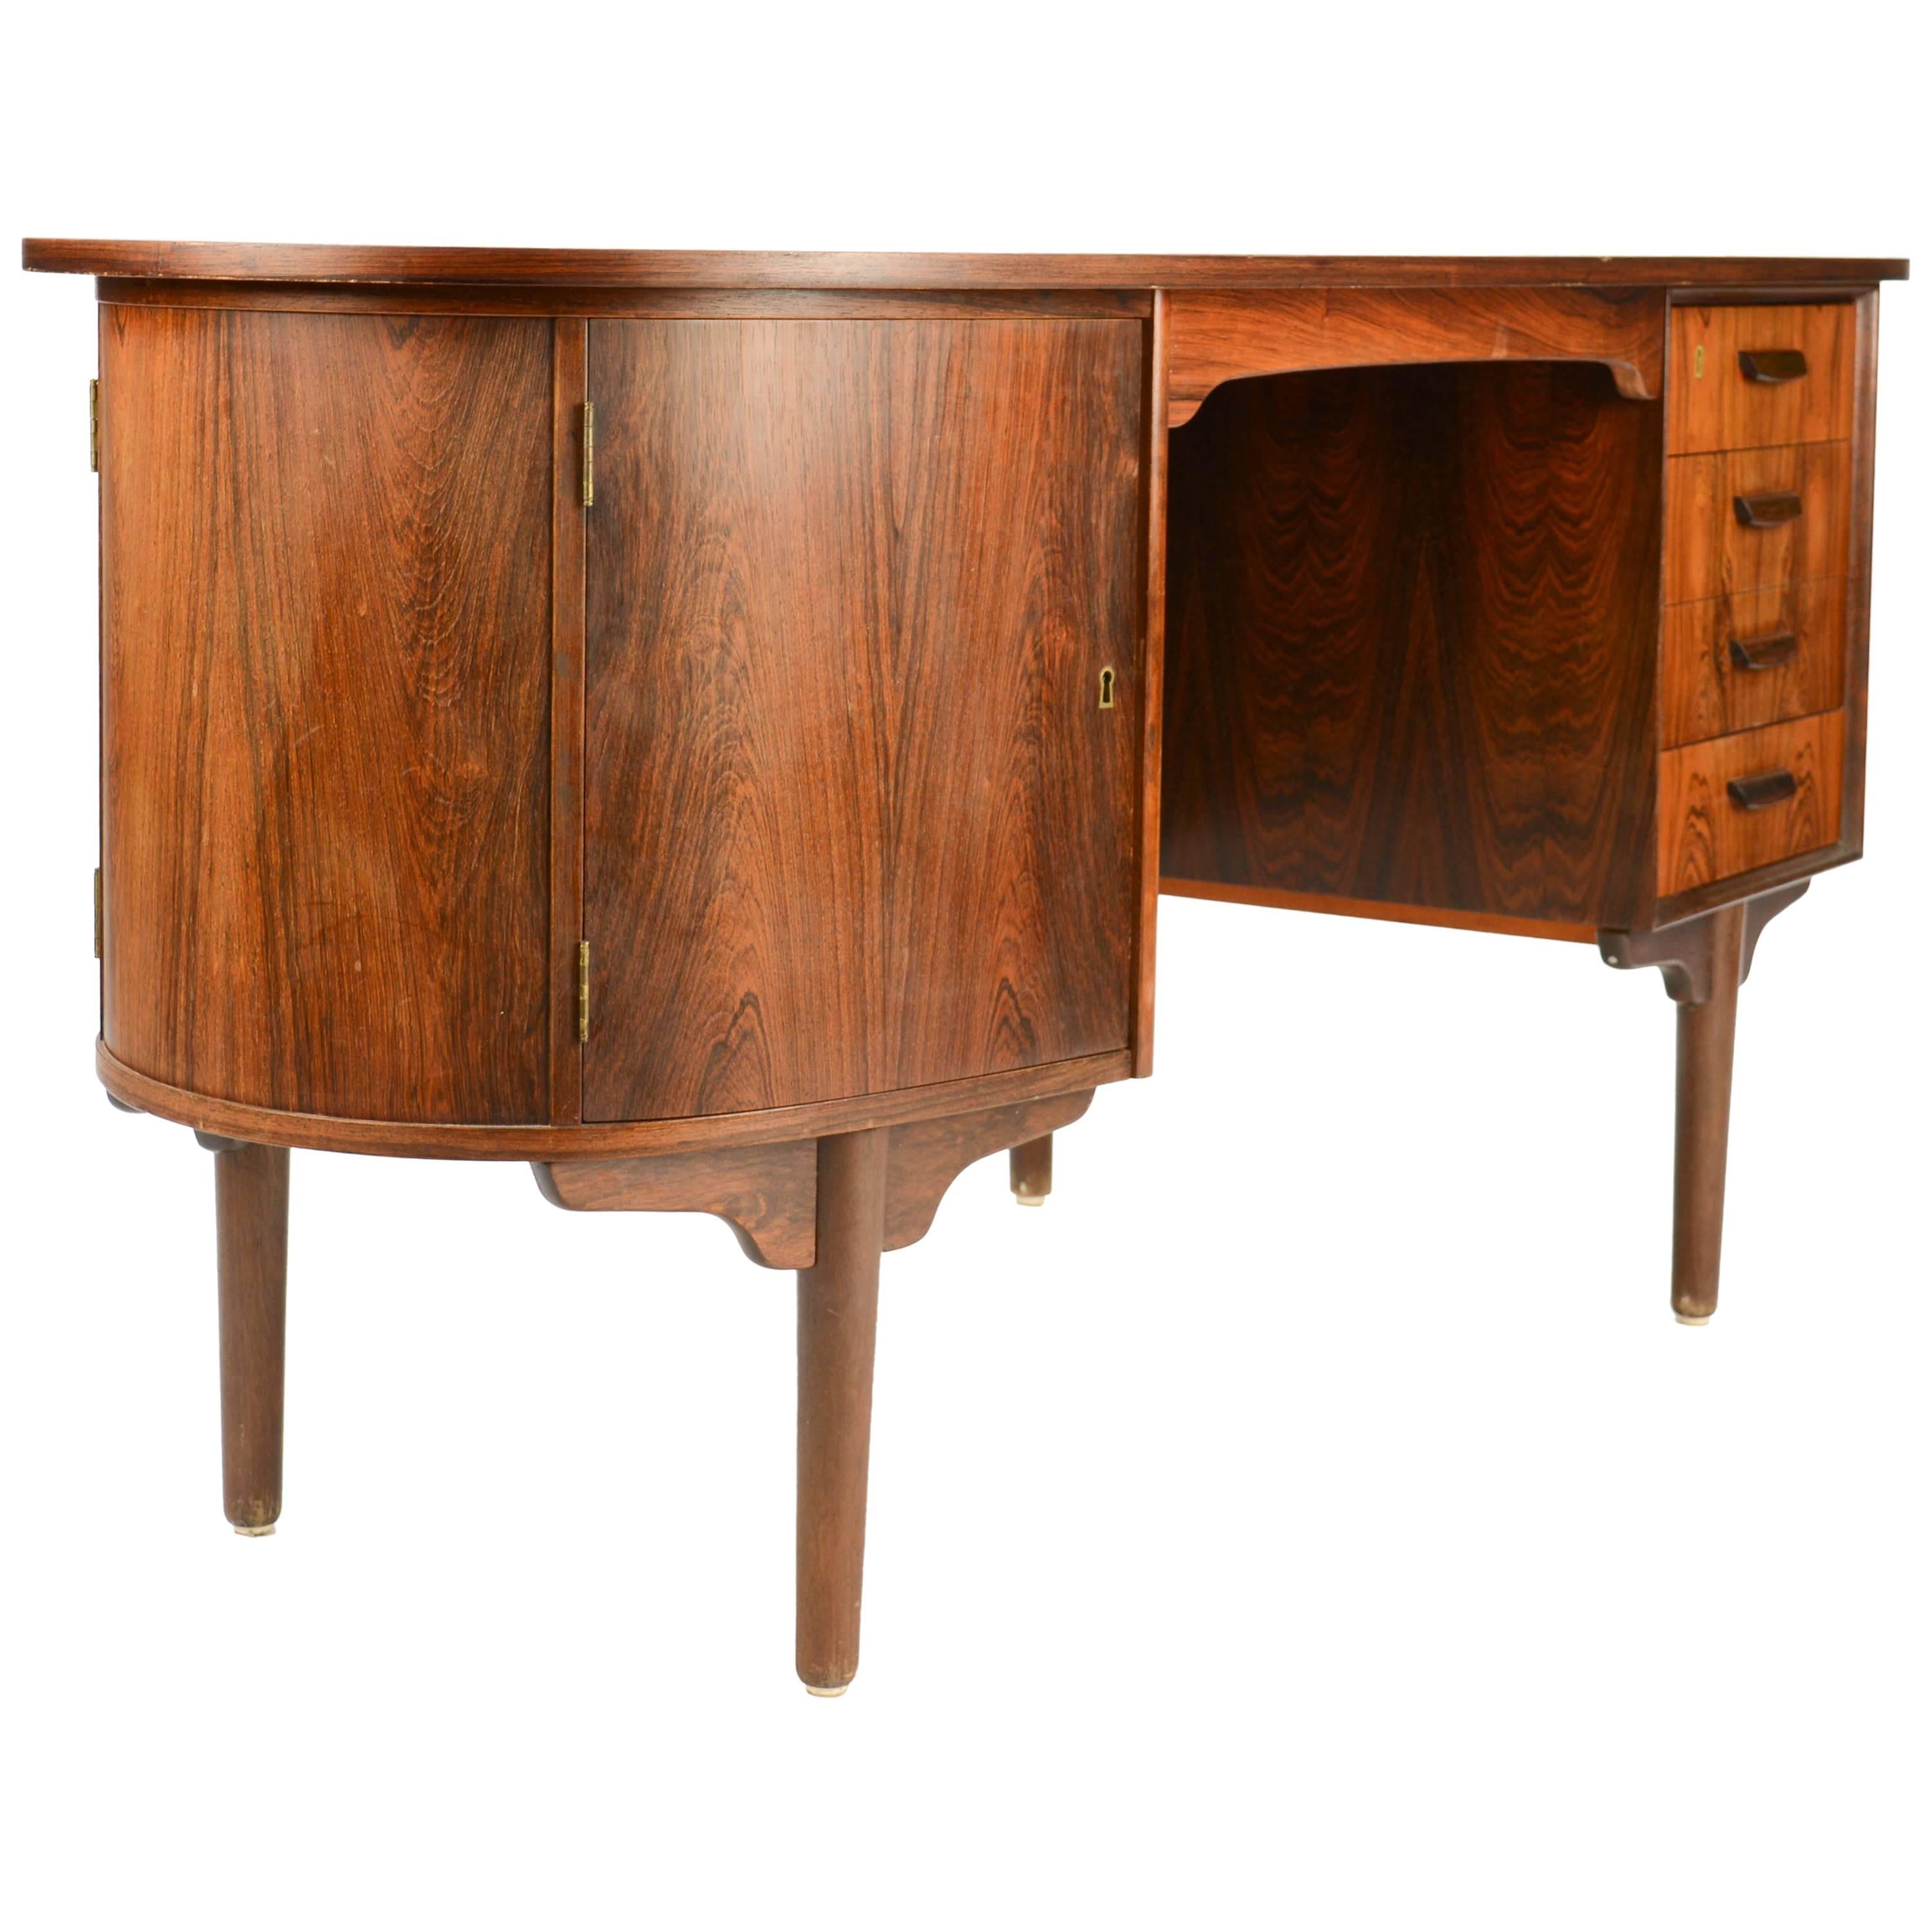 Magnificent and Sensual Kai Kristensen Rosewood Executive Desk from Denmark